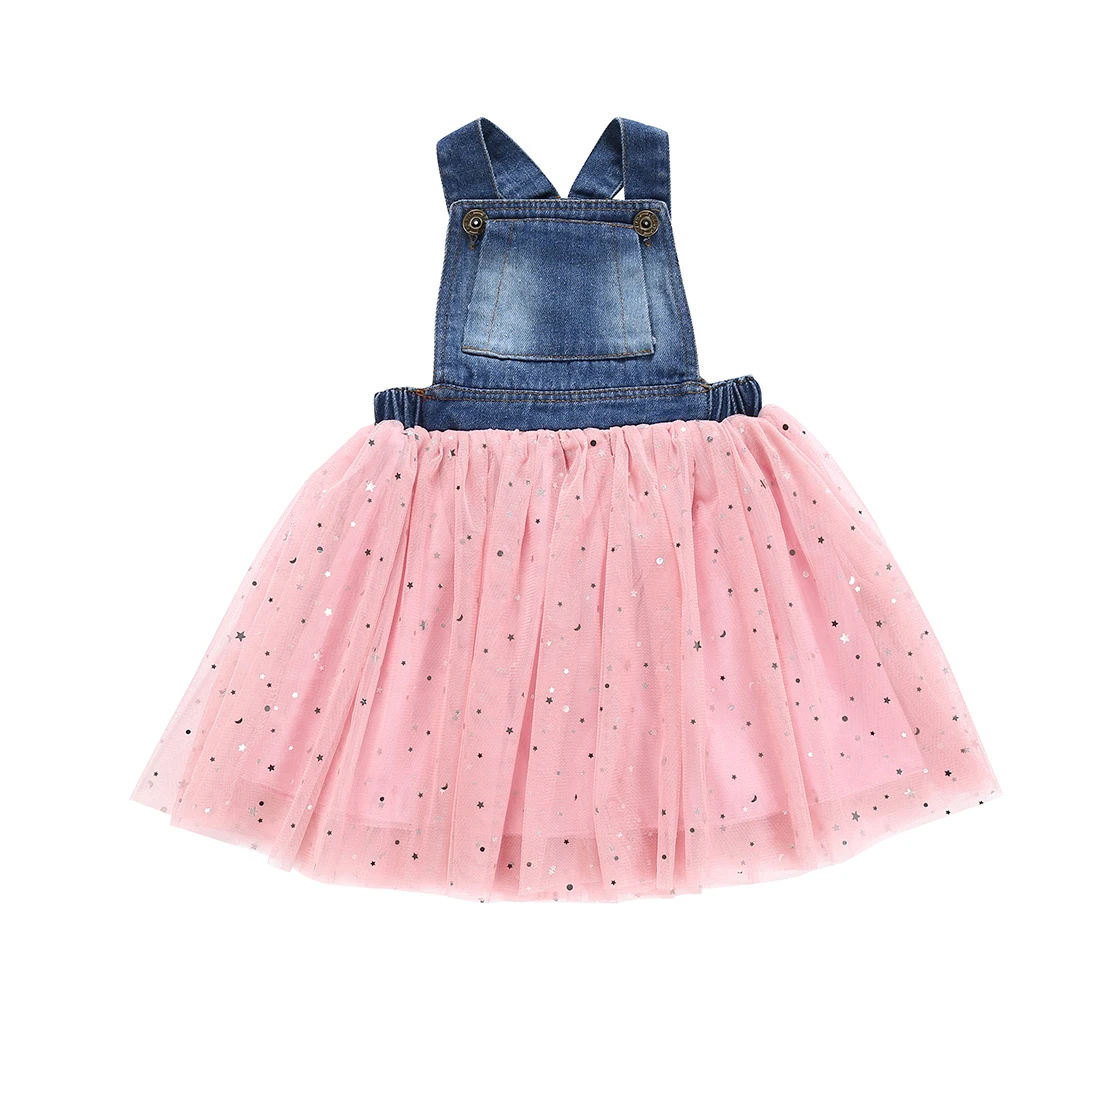 NEW 2020 Girl  Jeans Dress with Lace Sleeveless Design girls dresses kids baby clothes